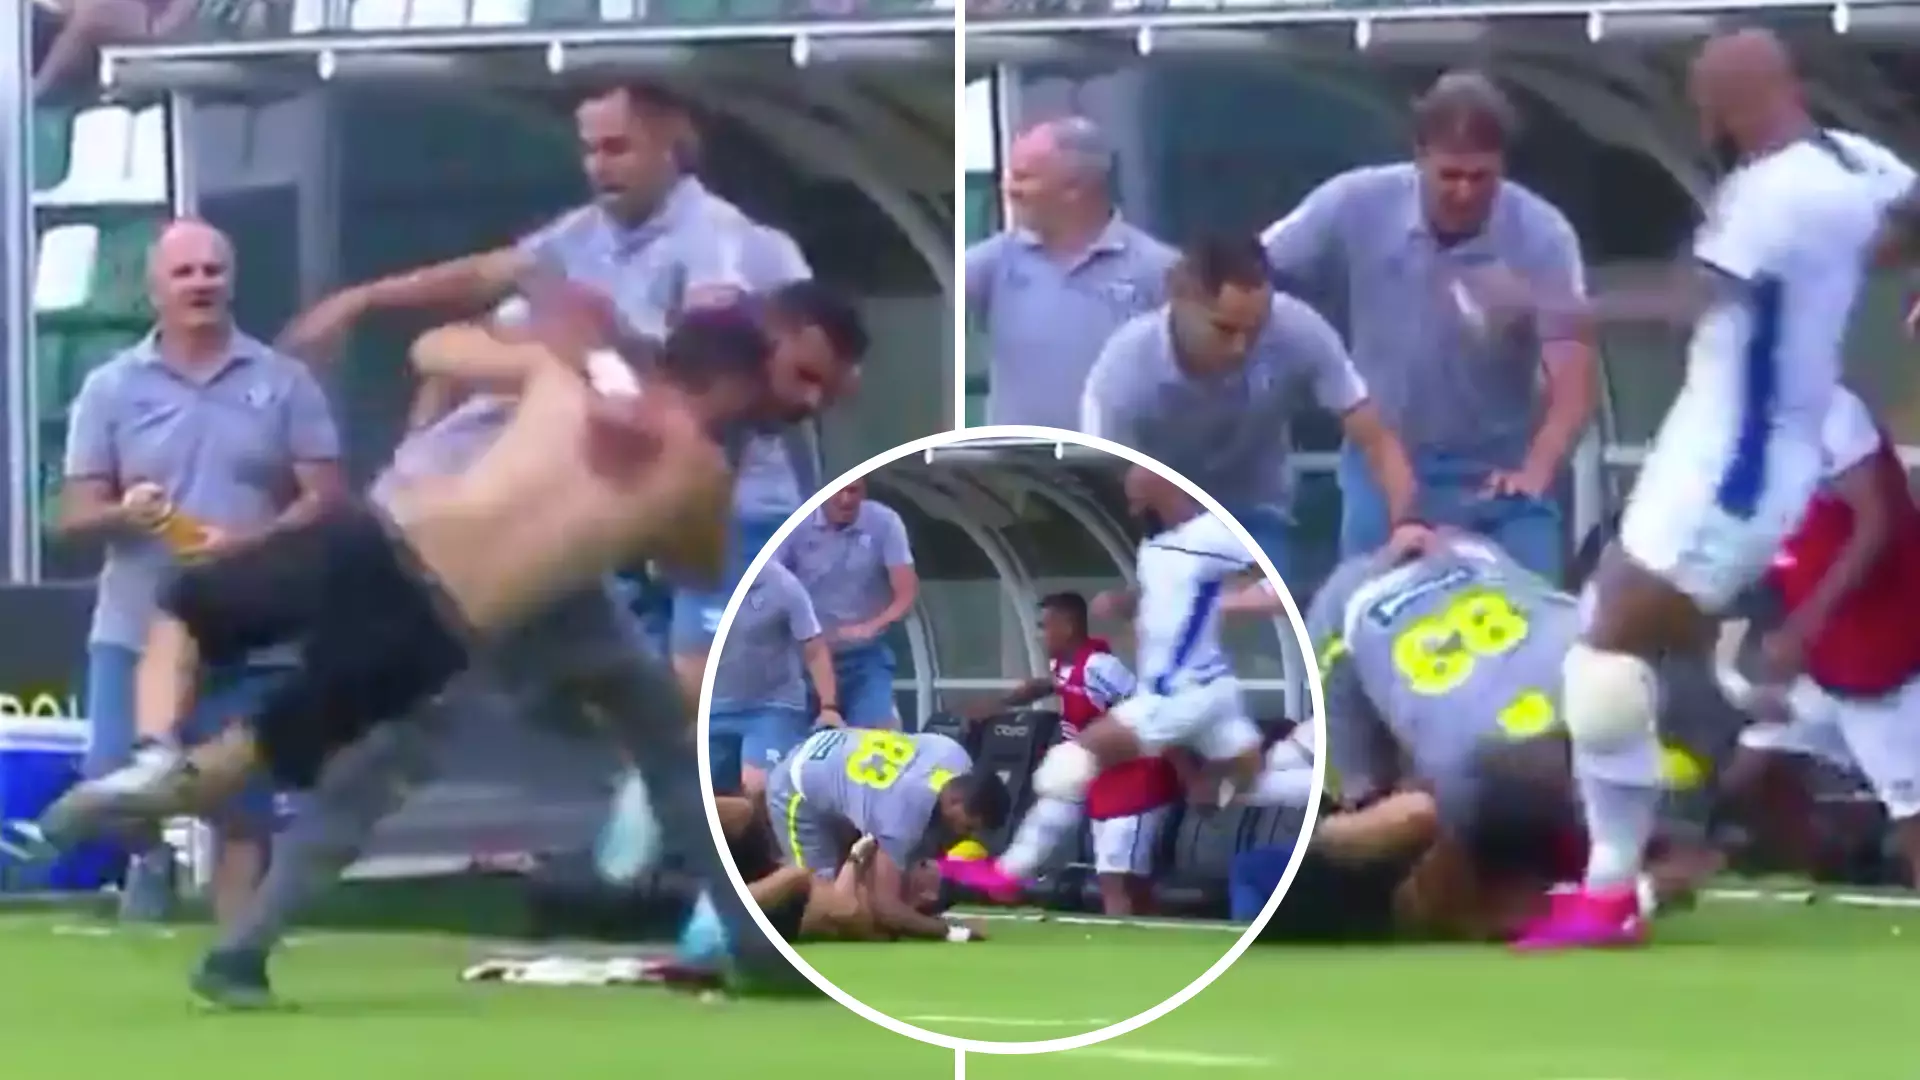 Bruno Silva Horrifyingly Kicks Pitch Invader’s Head Only Moments After He Was Hit With A Judo Takedown